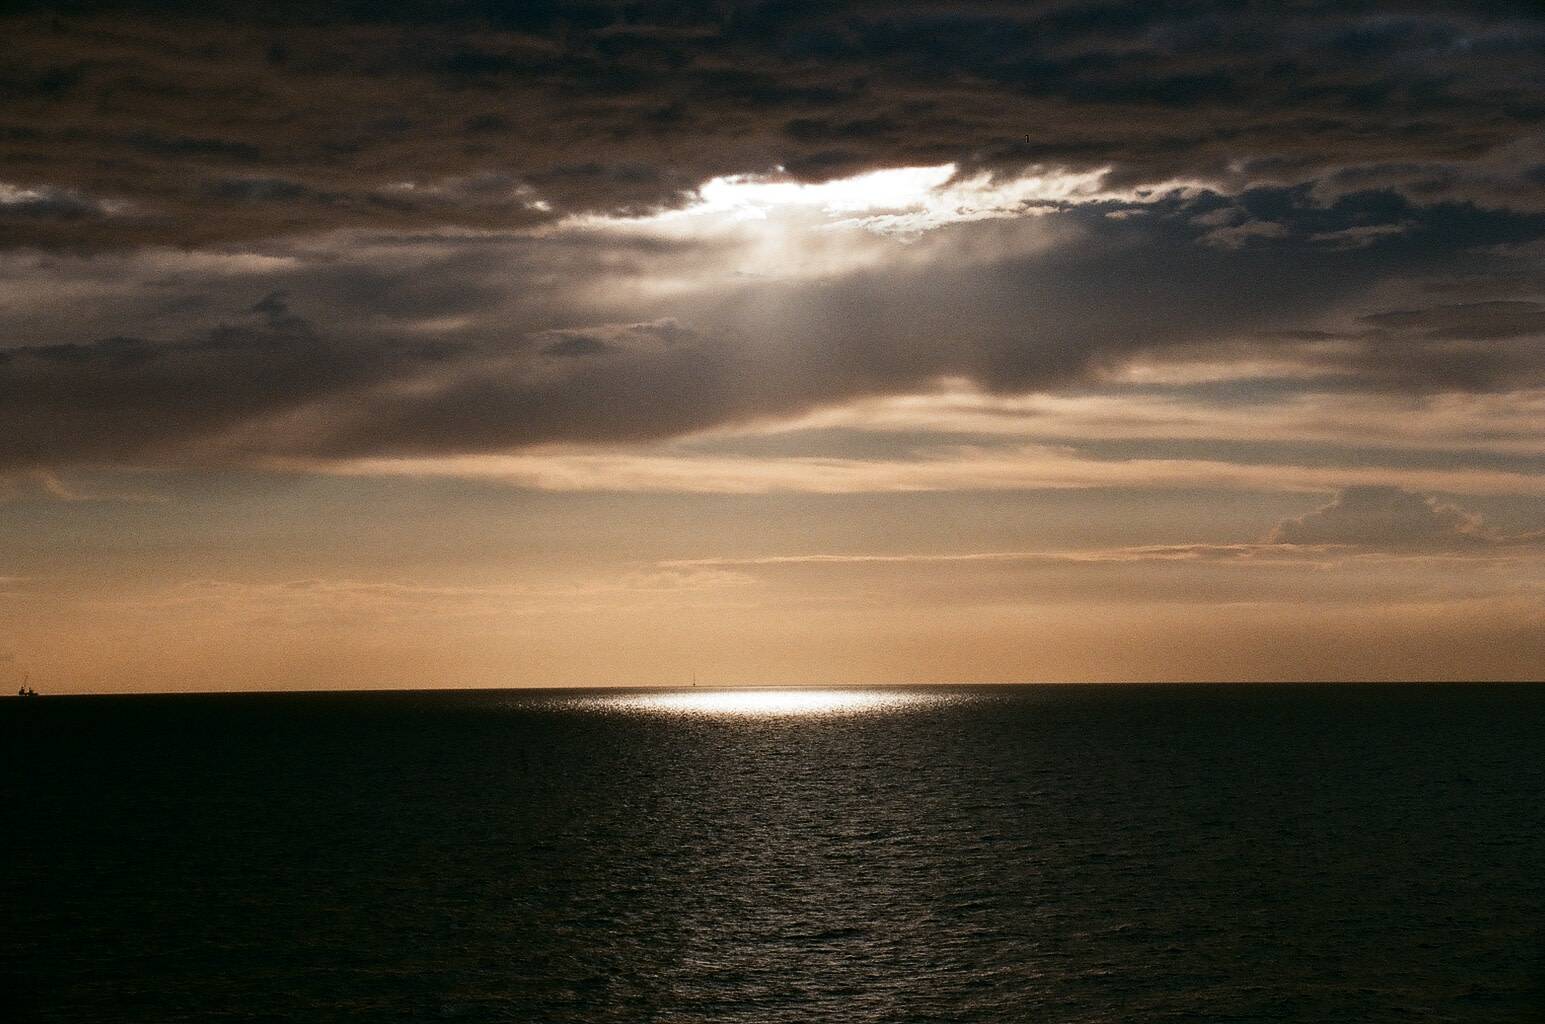 sunlight shining through the cloudy sky lightens up a small area on the dark sea, sky is clear and has orange hues on the horizon